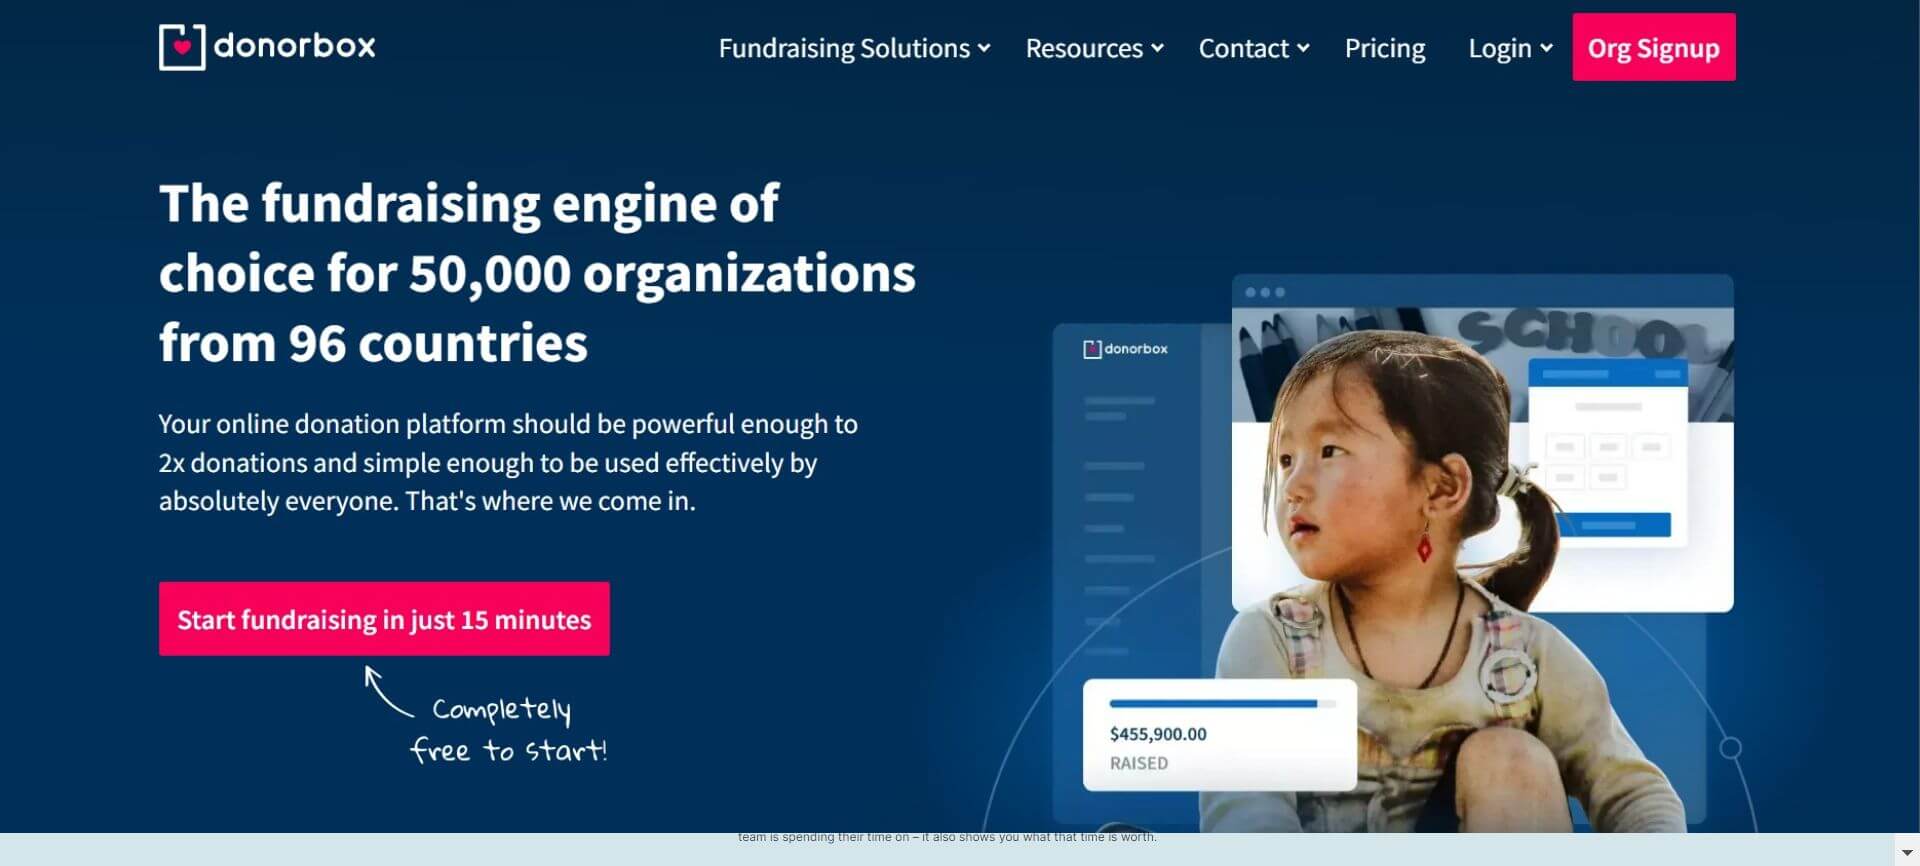 Donorbox is a cutting-edge technology tool